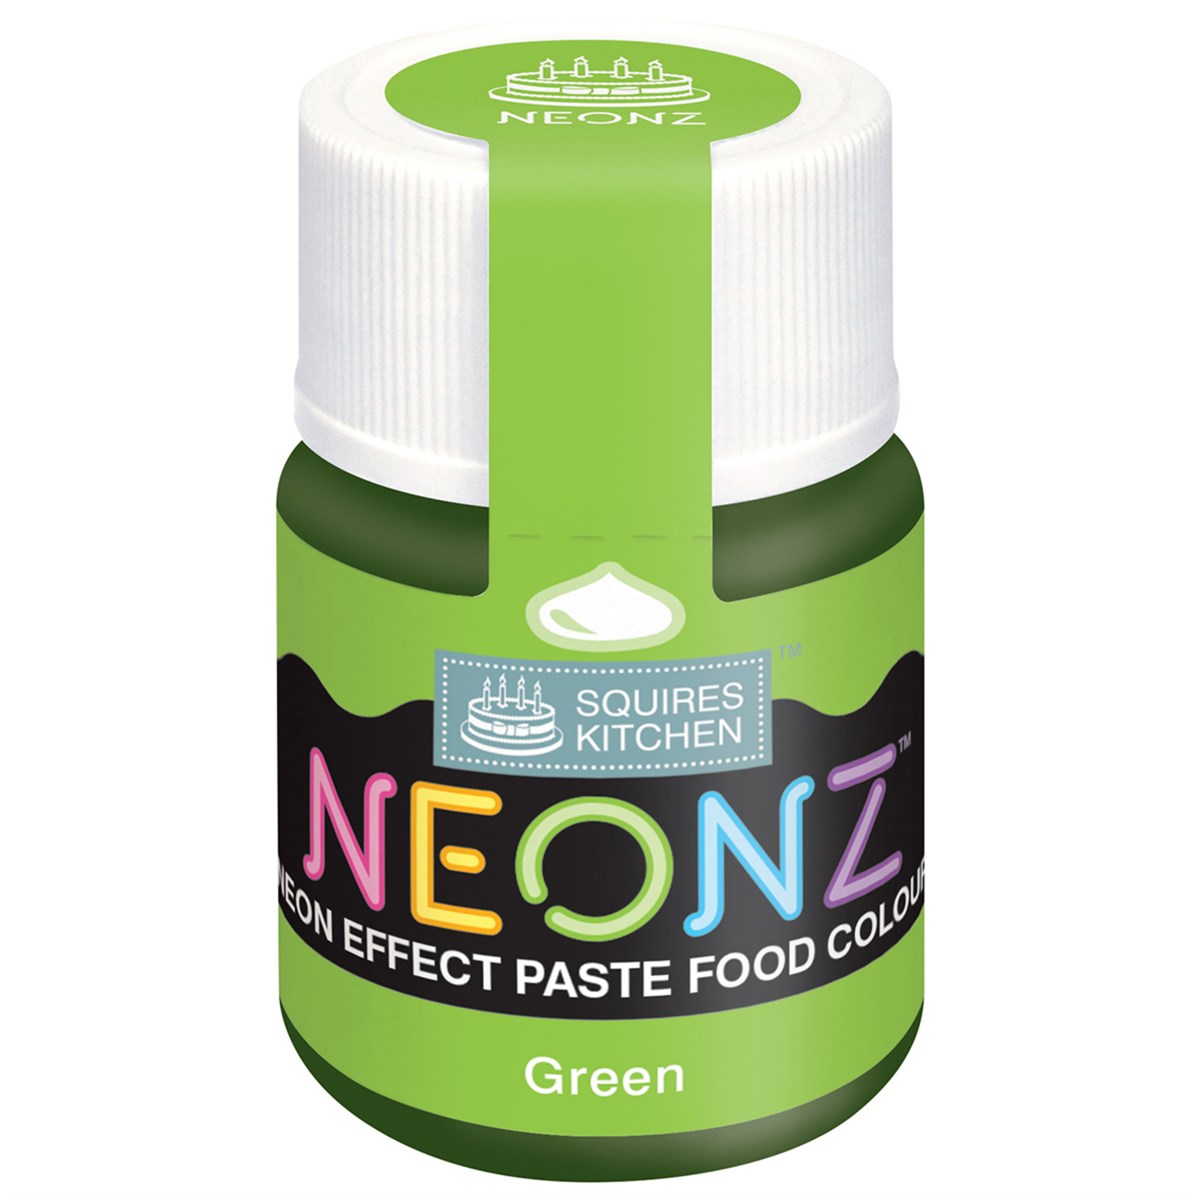 Squires Kitchen Neonz Neon Effect Concentrated Paste Food Colouring - 20g - Green